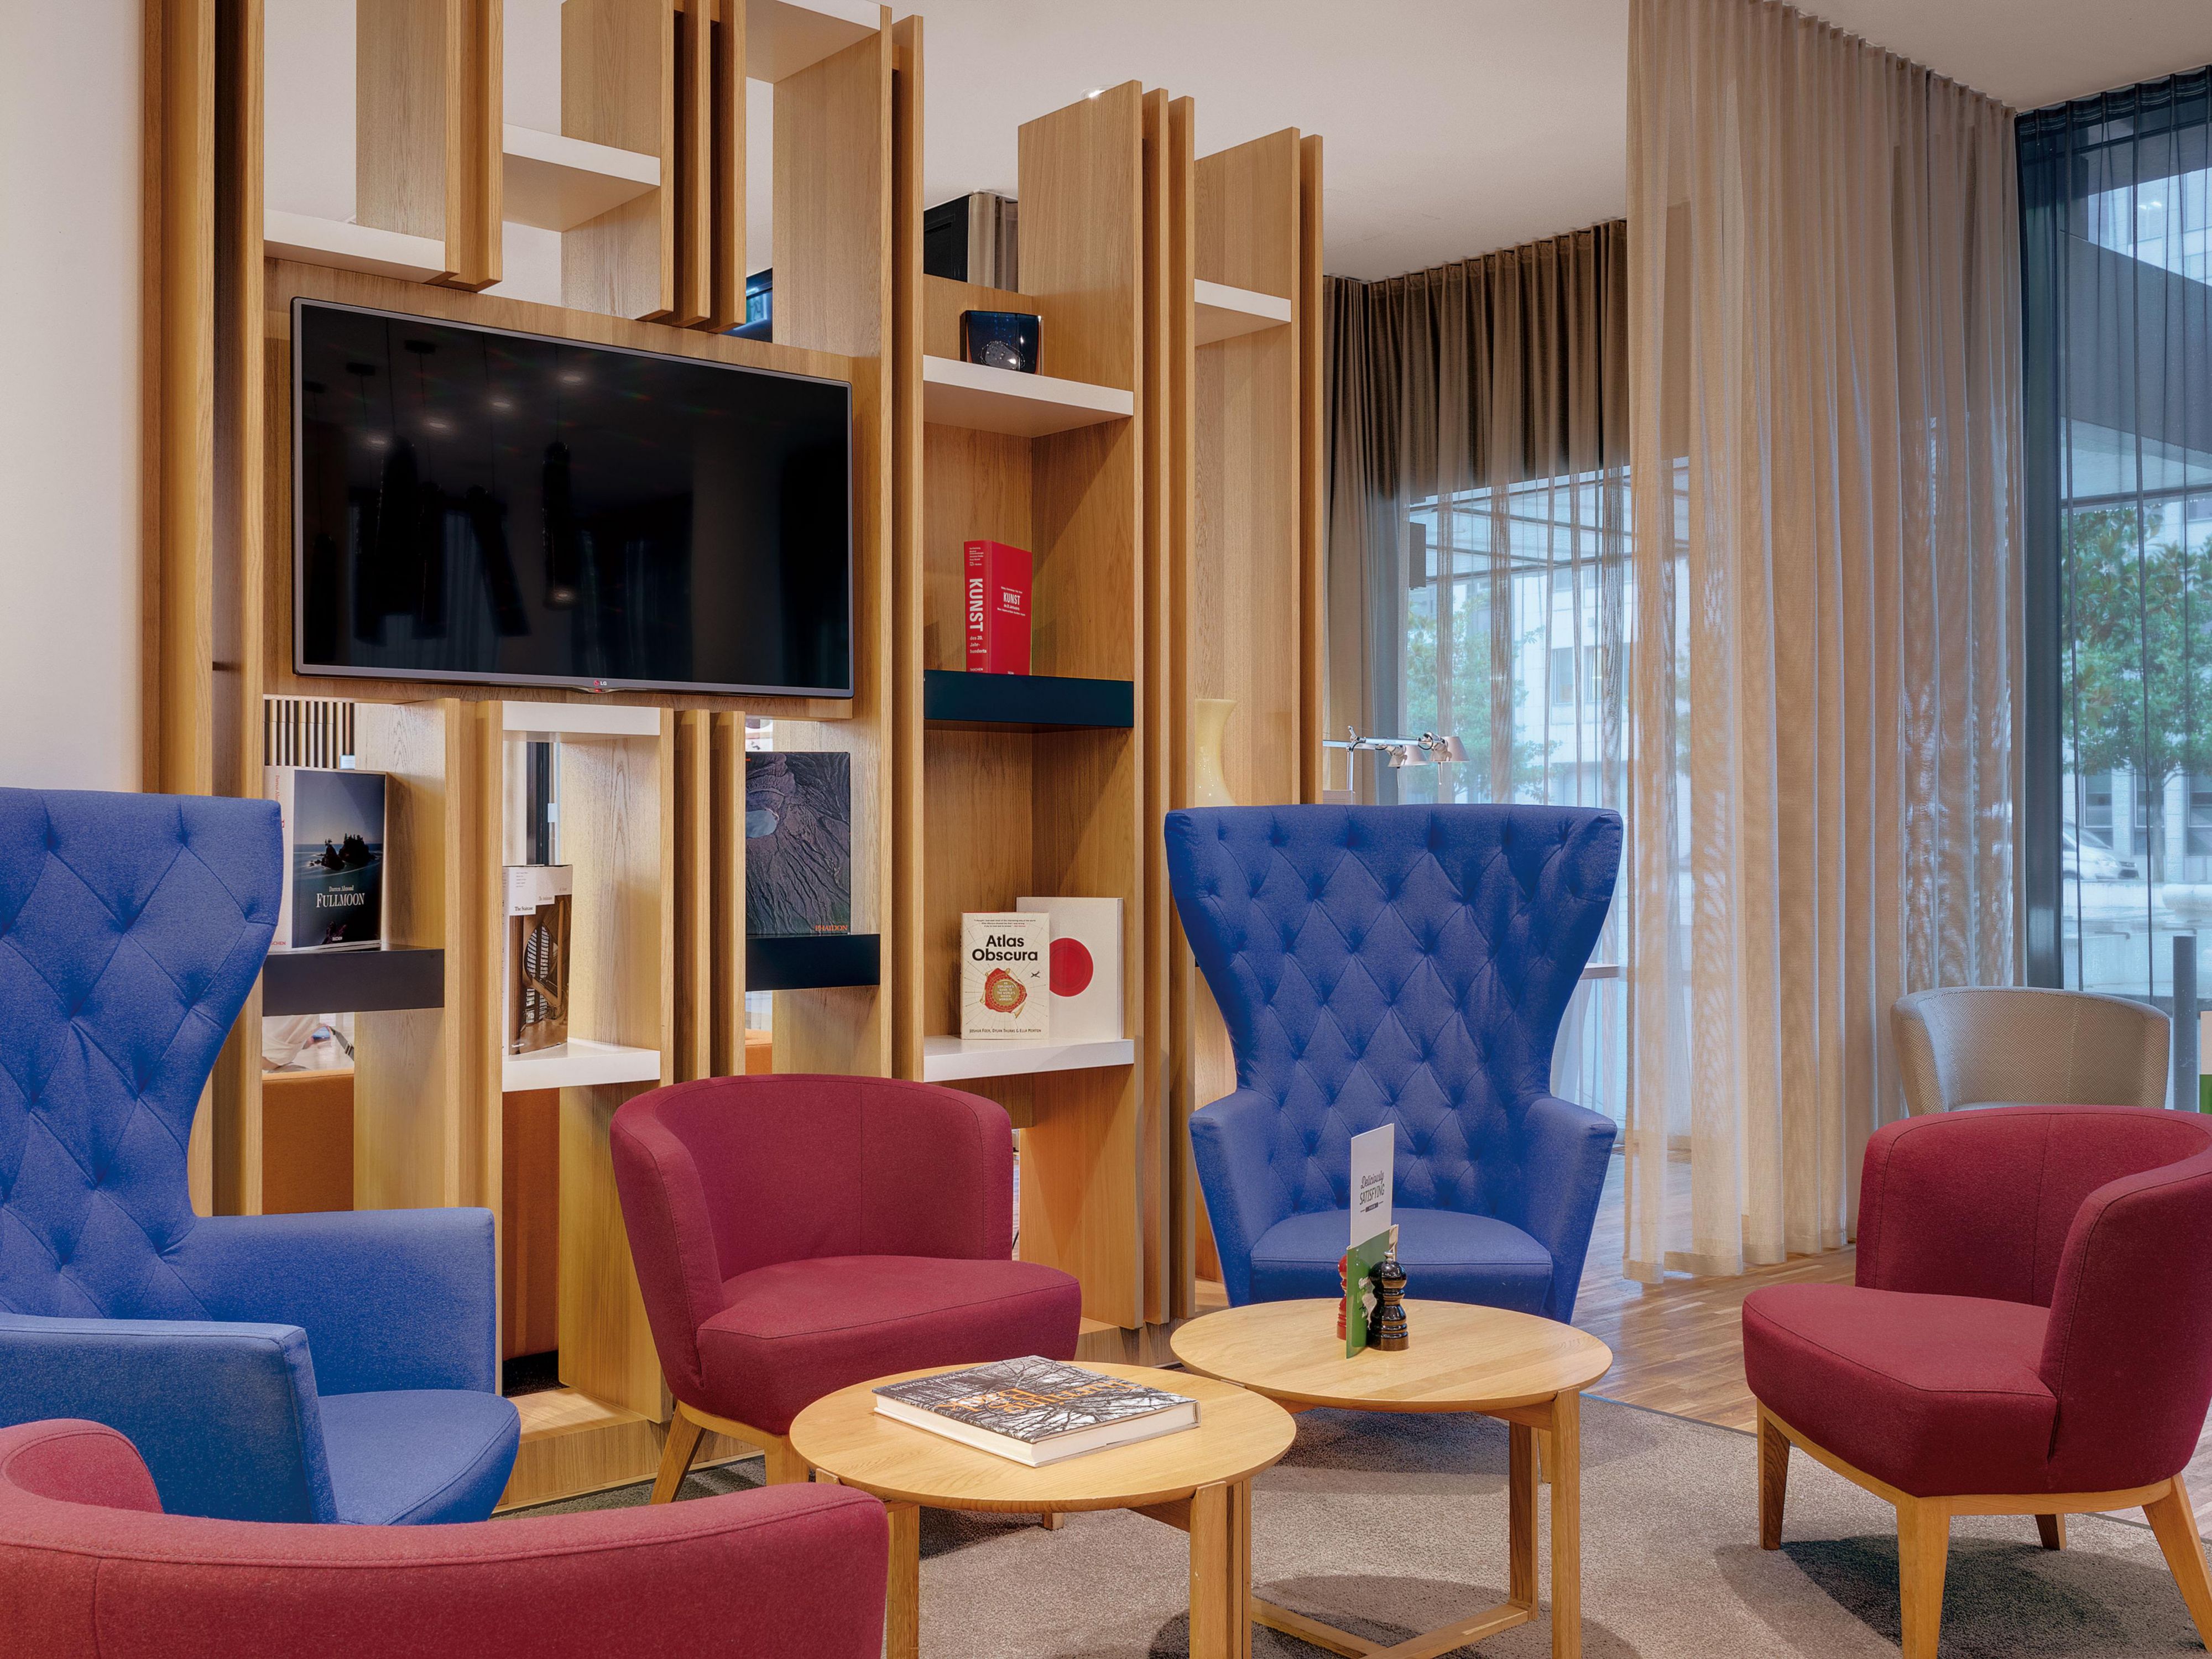 Ease between business and leisure in our hotel's vibrant open lobby - your living room in Frankfurt. Stay in touch with free Wi-Fi, relax with a cocktail, and enjoy dining in our American diner-style restaurant. Network or meet with friends at our daily happy hour from 17:00 - 19:00.